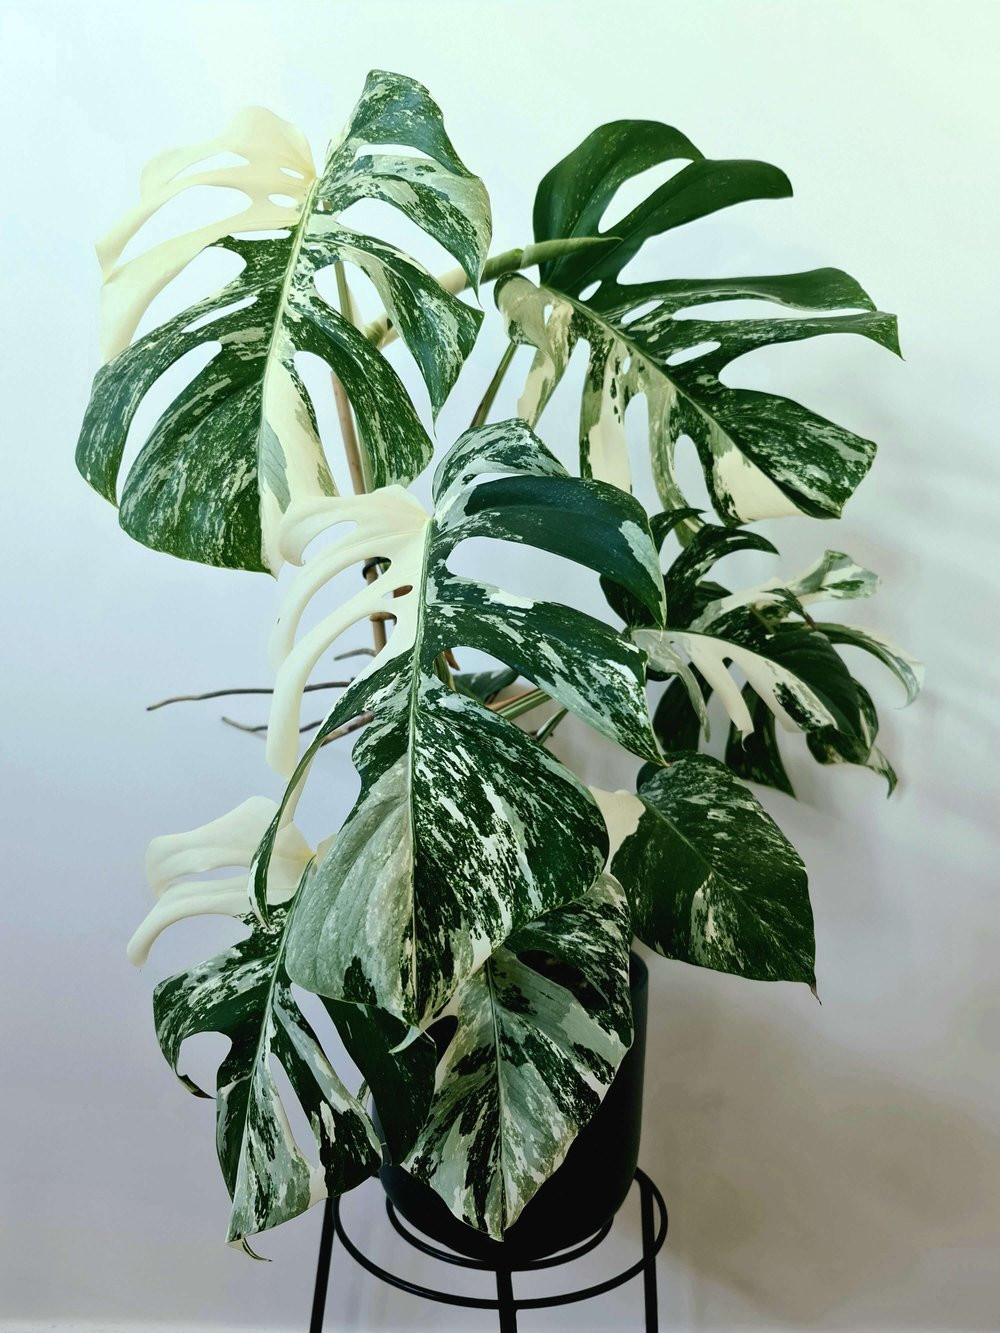 23 Big Houseplants To Make A Bold Statement In Your Living Room - 181